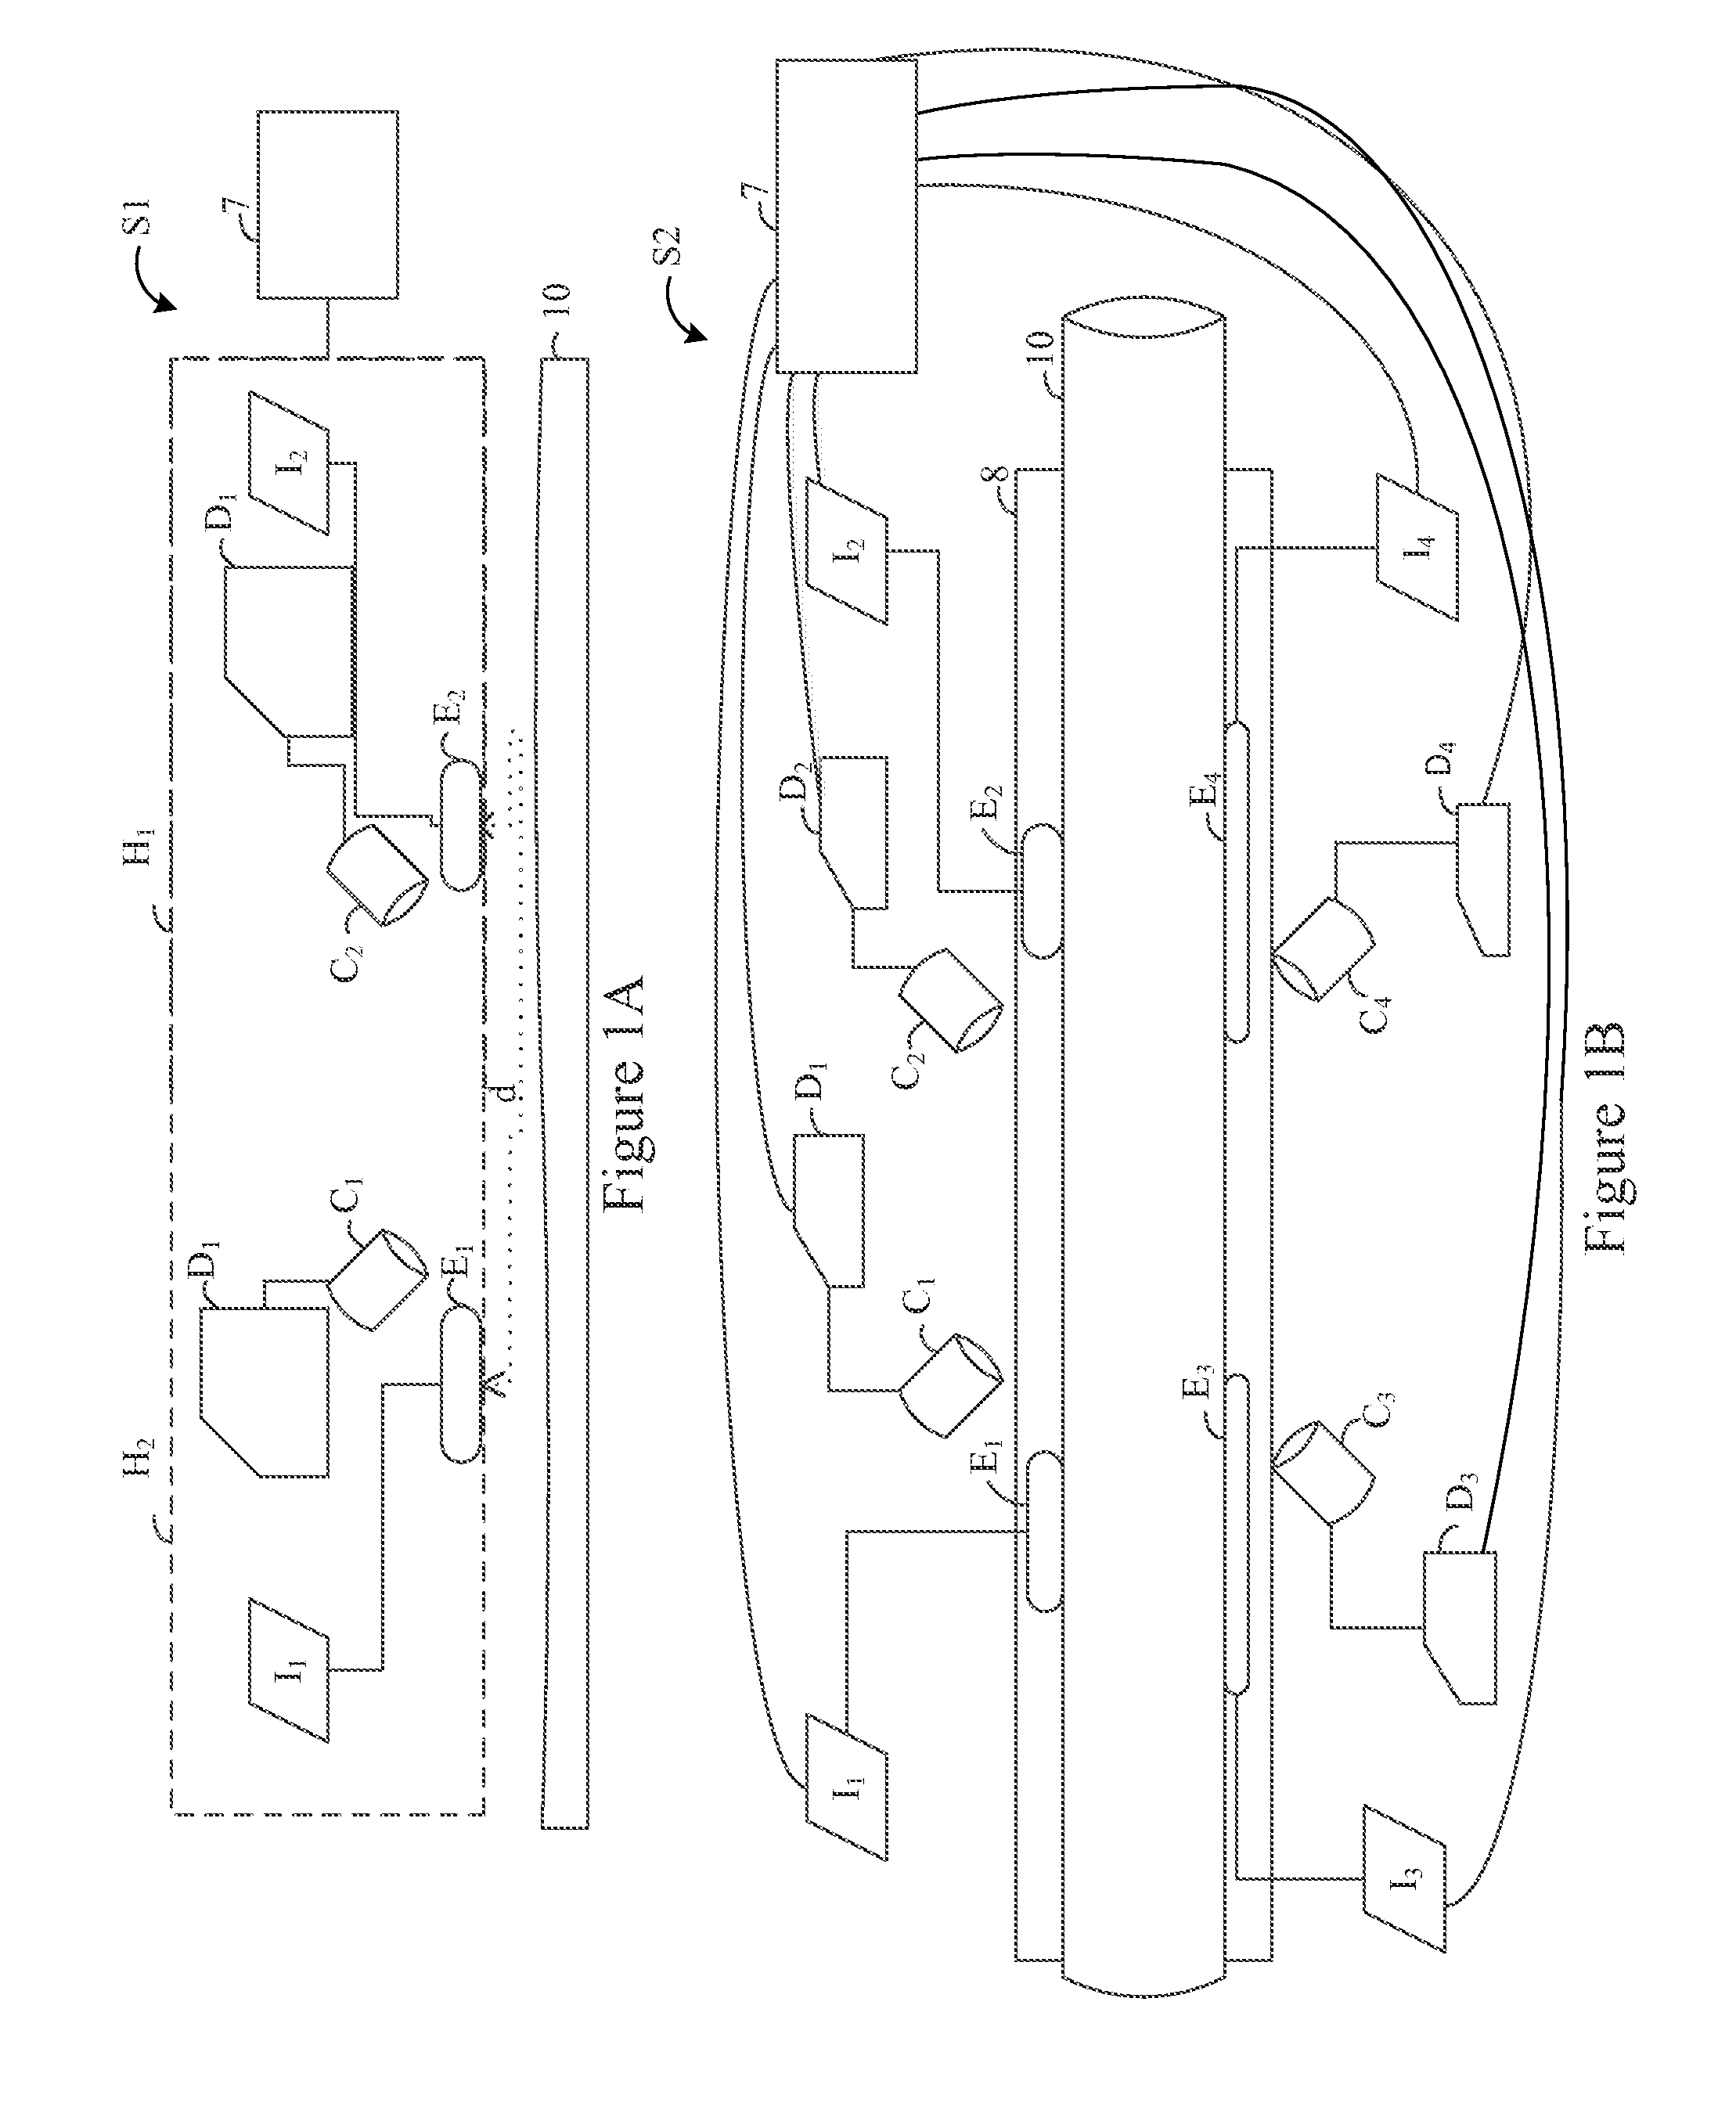 Current Delivery Systems, Apparatuses and Methods